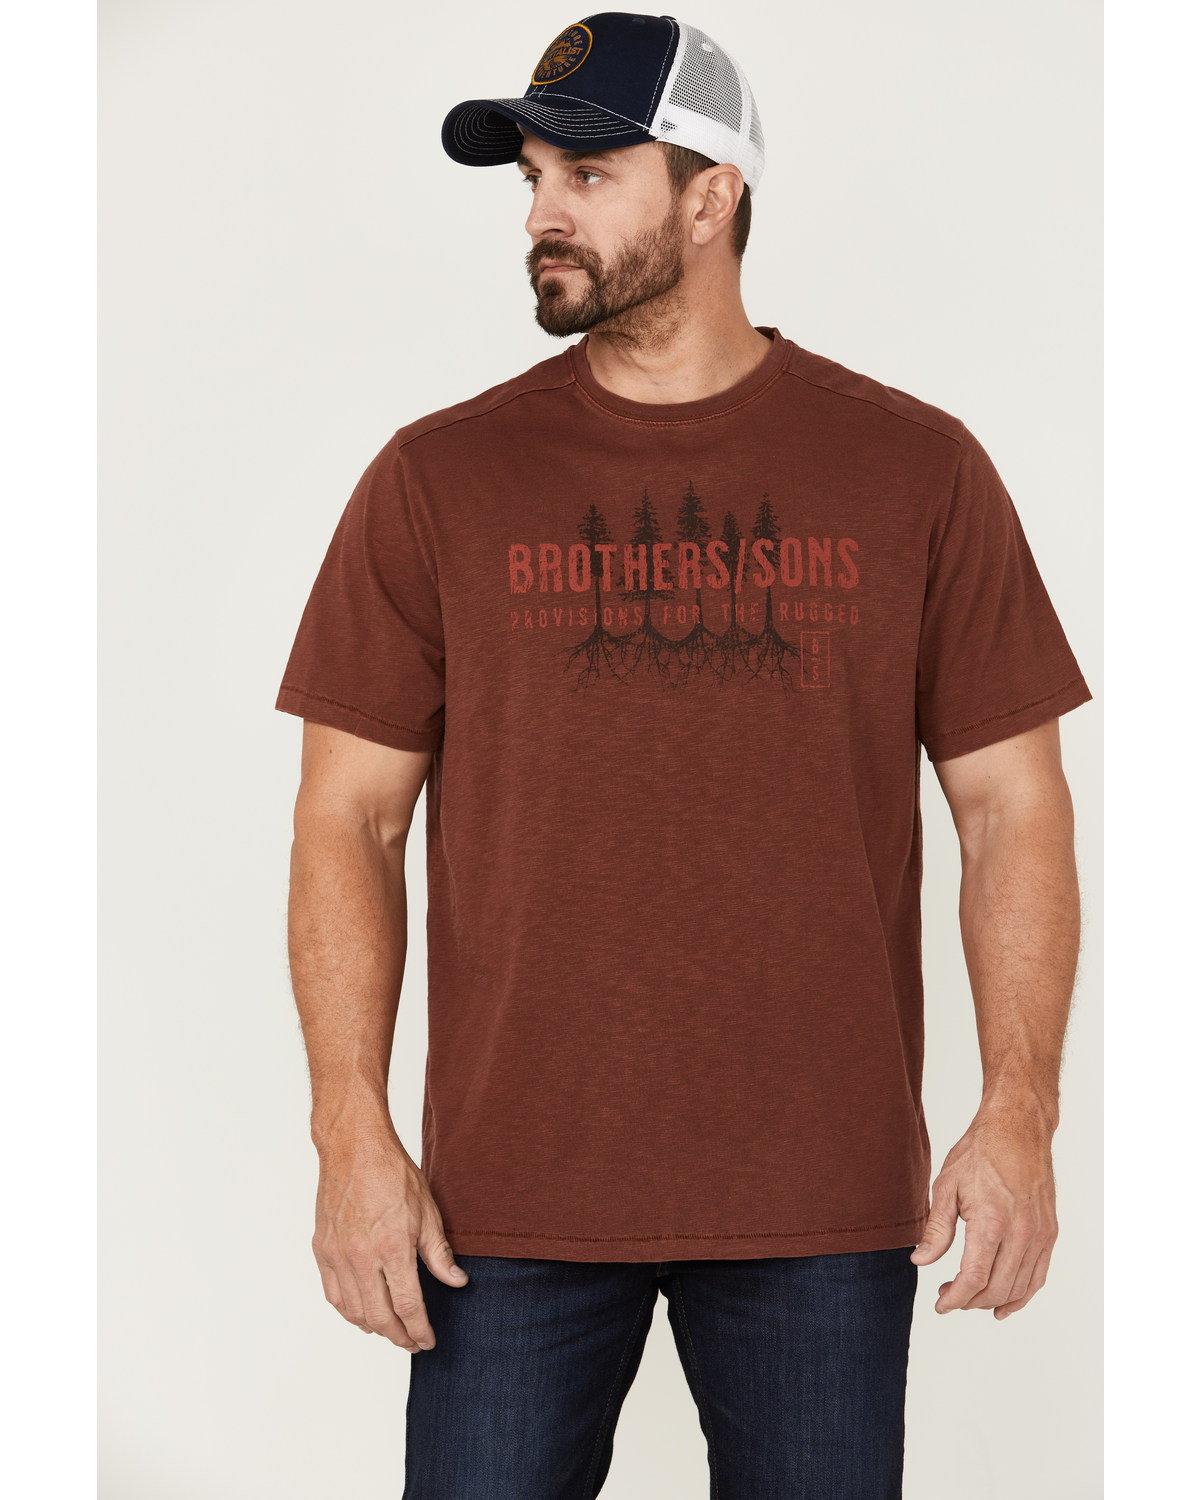 Brothers and Sons Men's Badlands Treeline Graphic T-Shirt